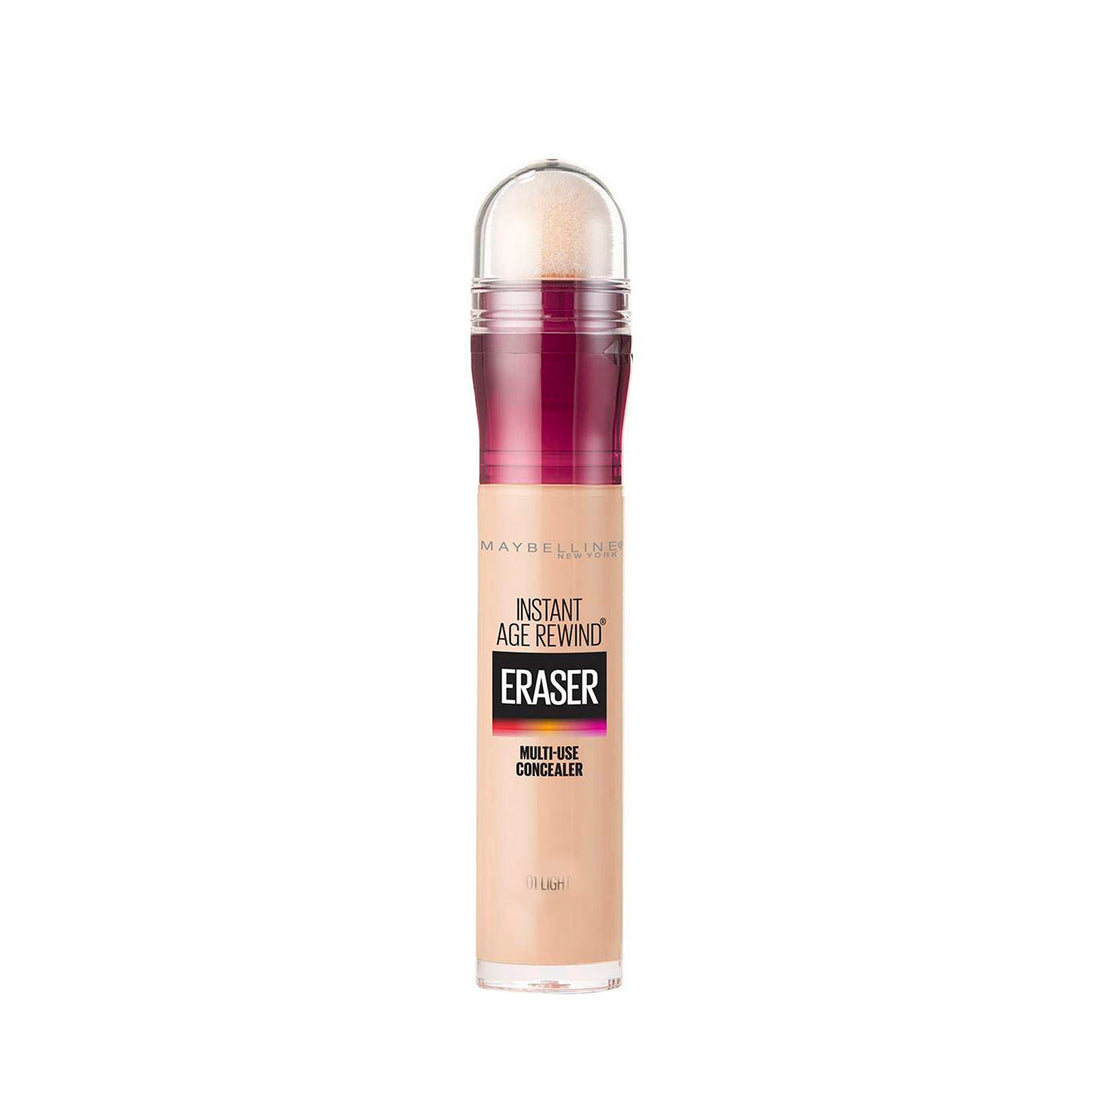 Maybelline Broker Handles Instant Anti-Agage No. 01 Light